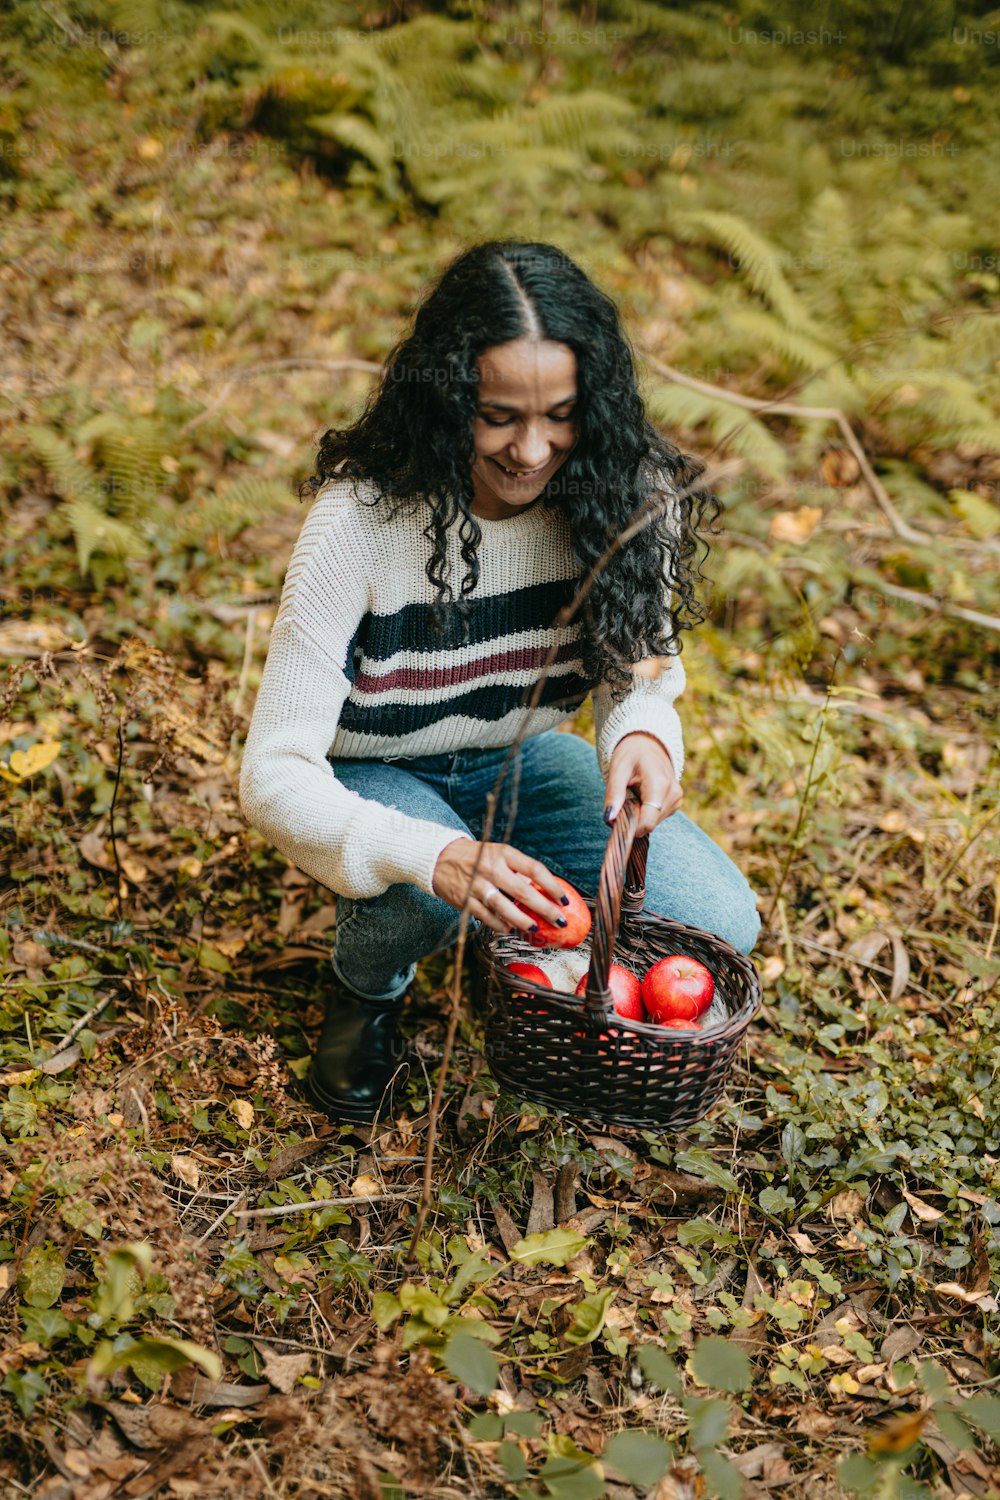 a woman sitting on the ground with a basket of apples